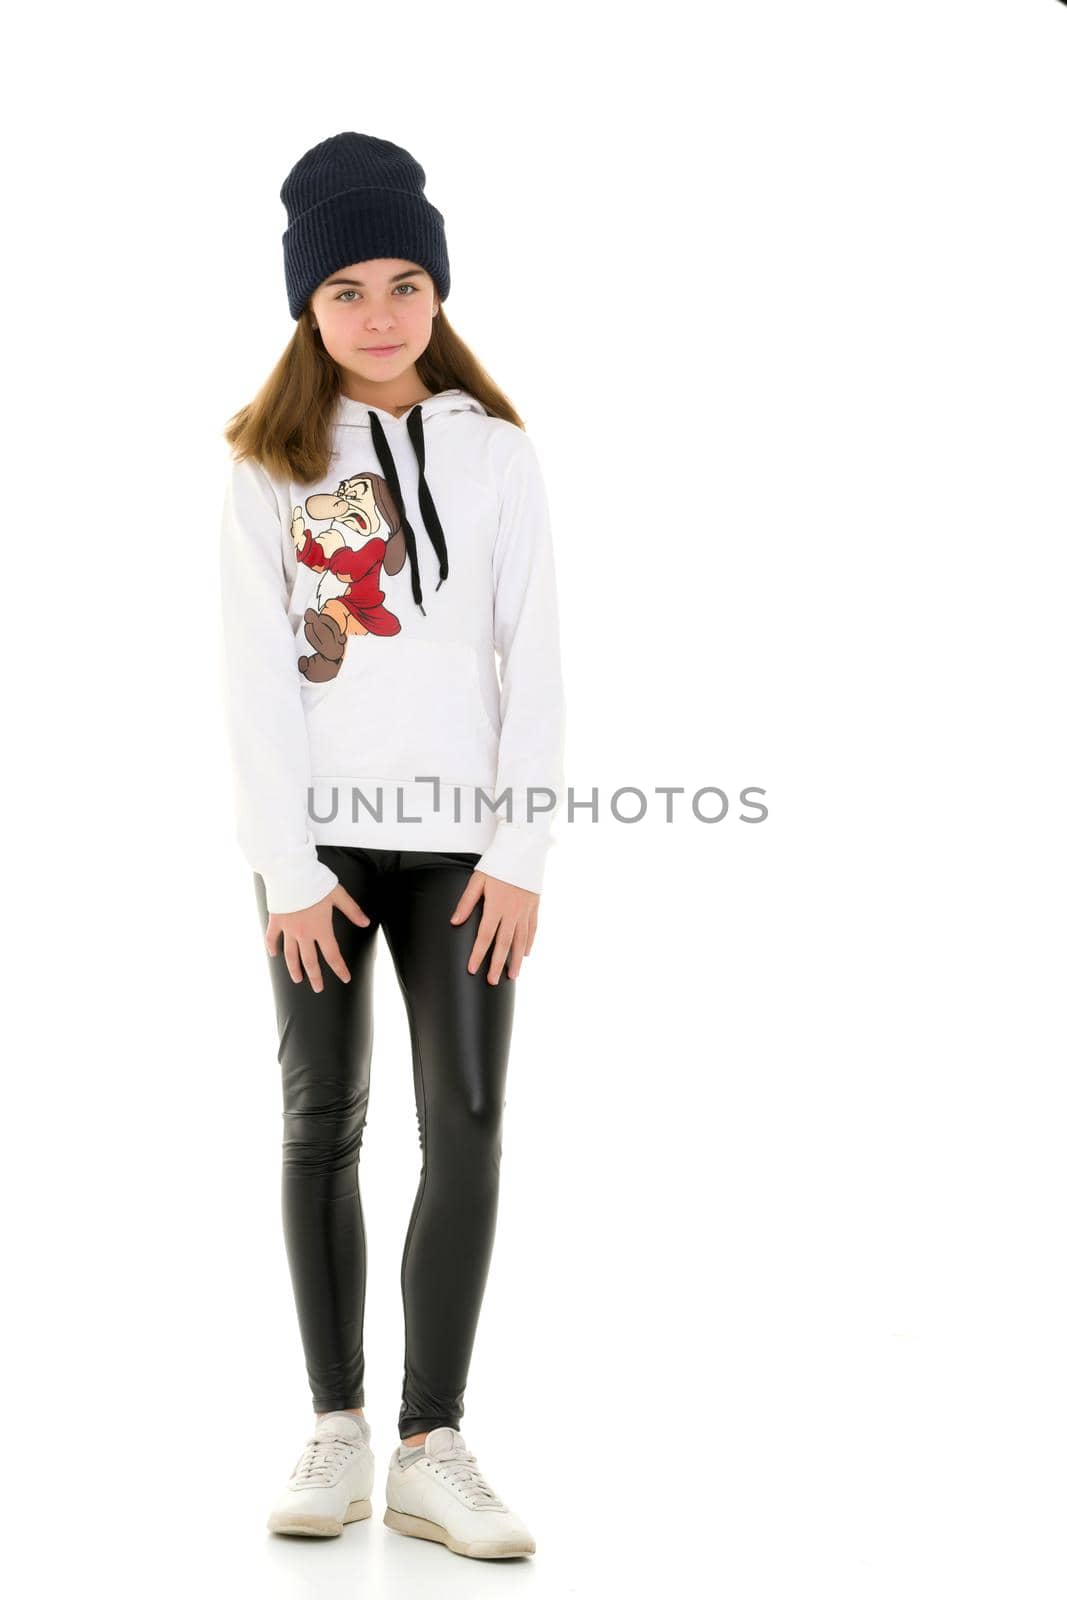 Portrait of a gymnast girl in a tracksuit. Isolated on white background